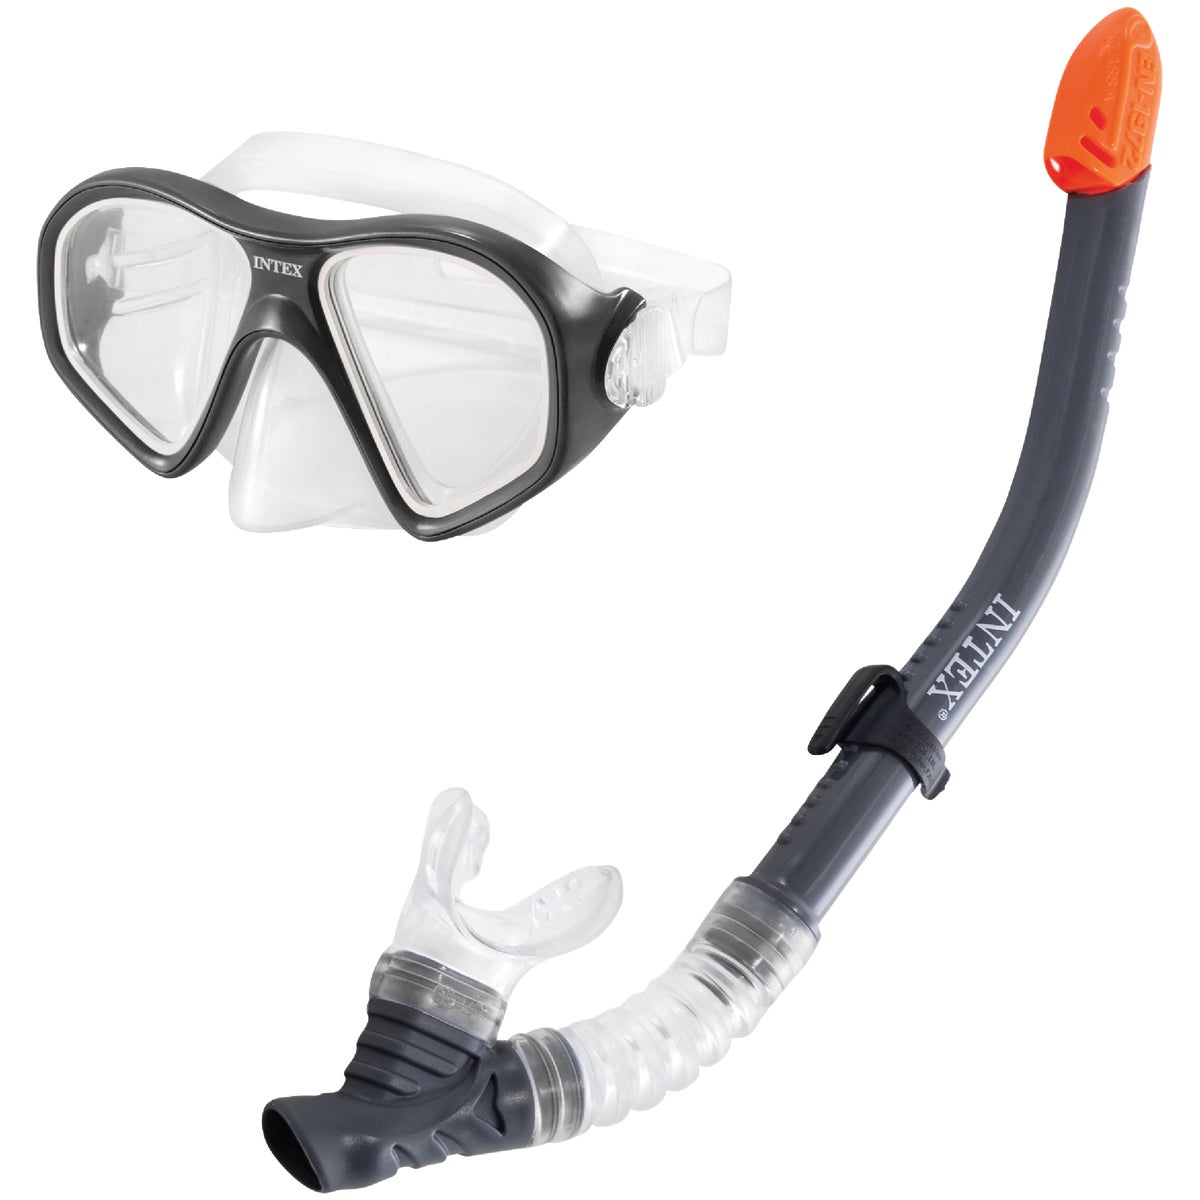 Item 800460, Reef Rider mask features polycarbonate lenses offering increased safety and